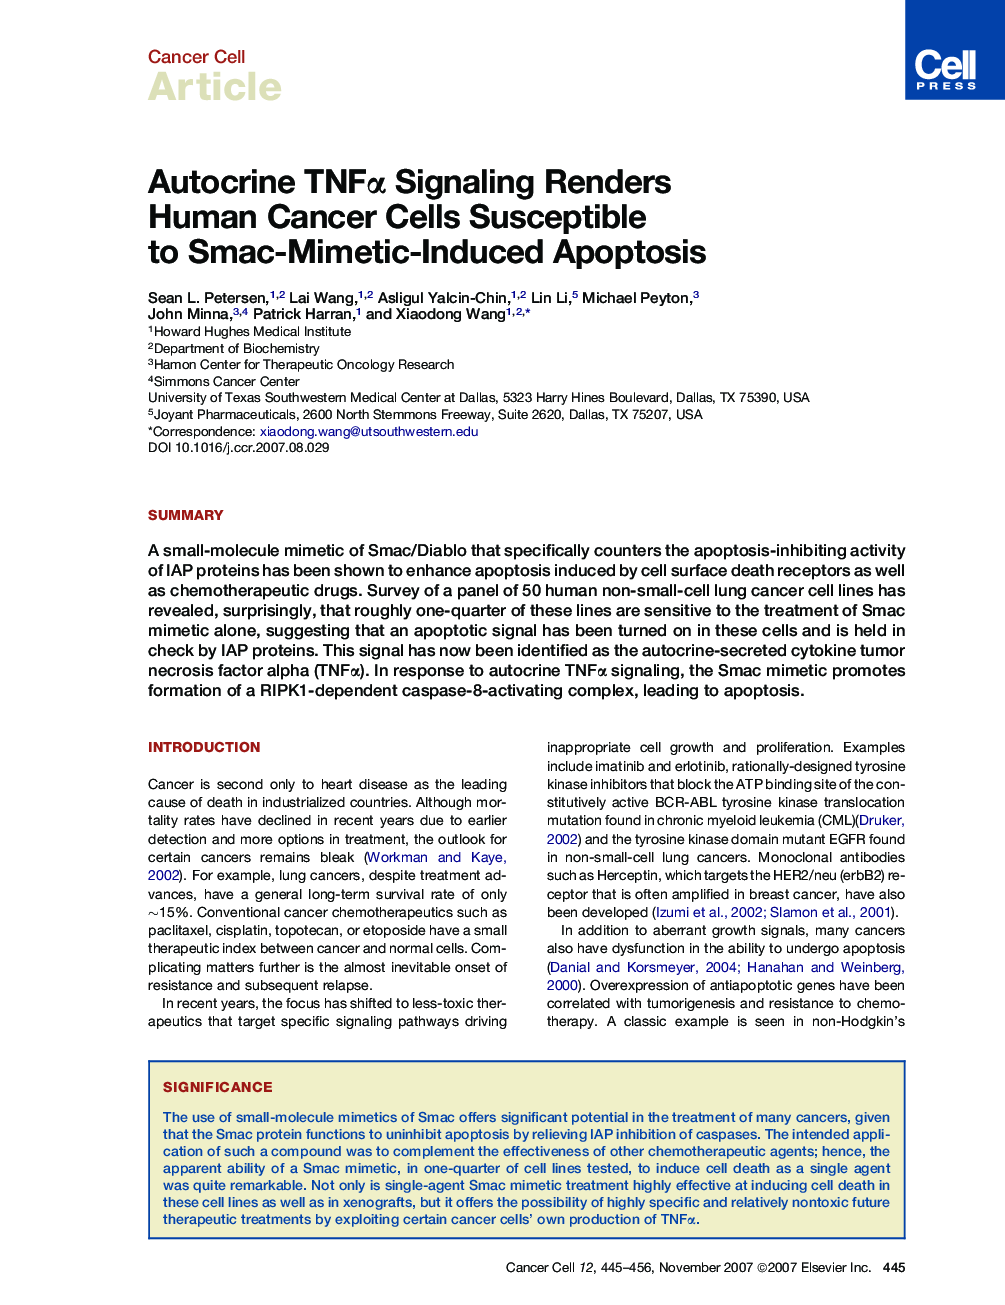 Autocrine TNFα Signaling Renders Human Cancer Cells Susceptible to Smac-Mimetic-Induced Apoptosis